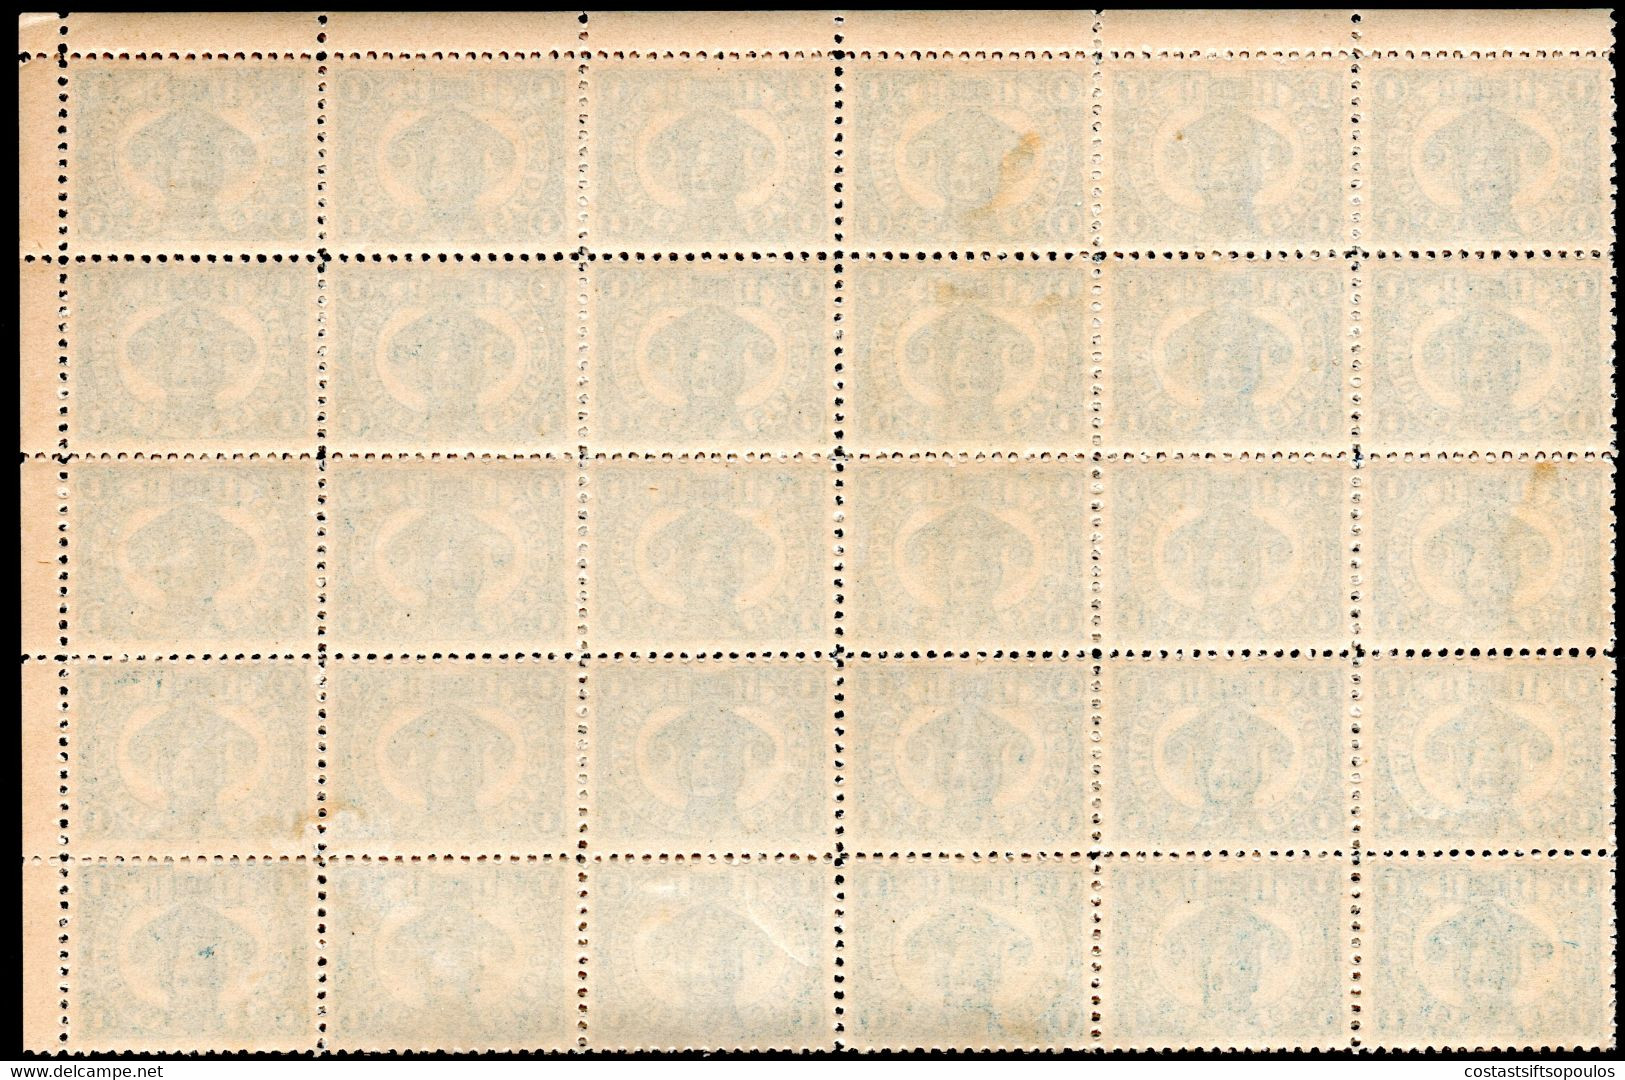 147.SWEDEN LOCAL,1887 STOCKHOLMS STADSPOST 1 ORE,MNH SHEET OF 60,FOLDED IN THE MIDDLE - Emissions Locales